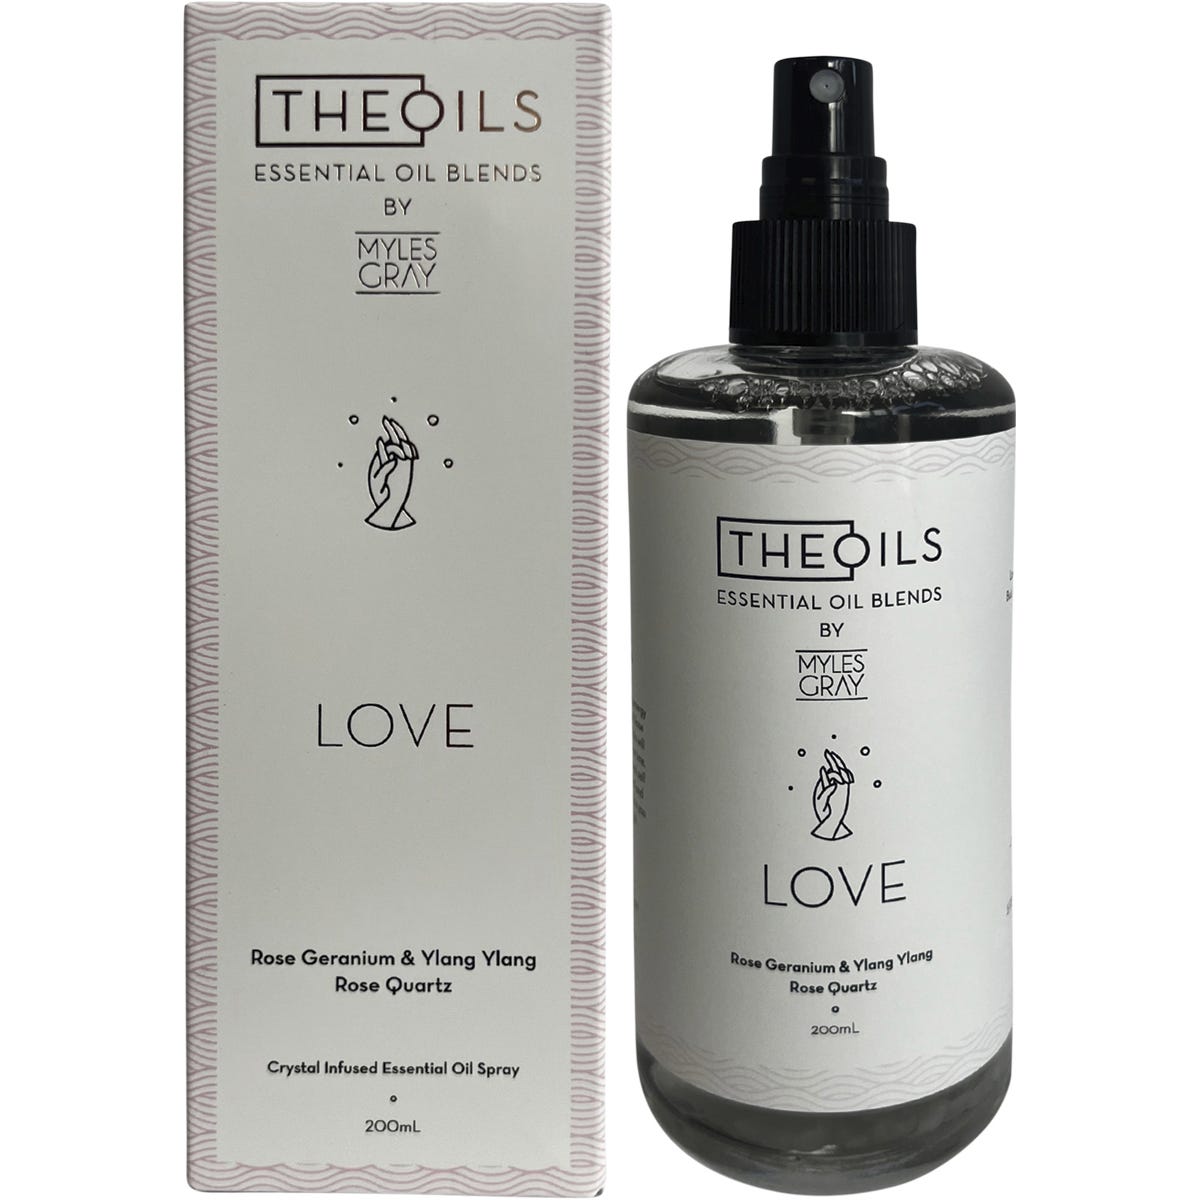 Myles Gray TheOils Room Spray Rose Geranium & Ylang Ylang 200ml - Dr Earth - Cleaning